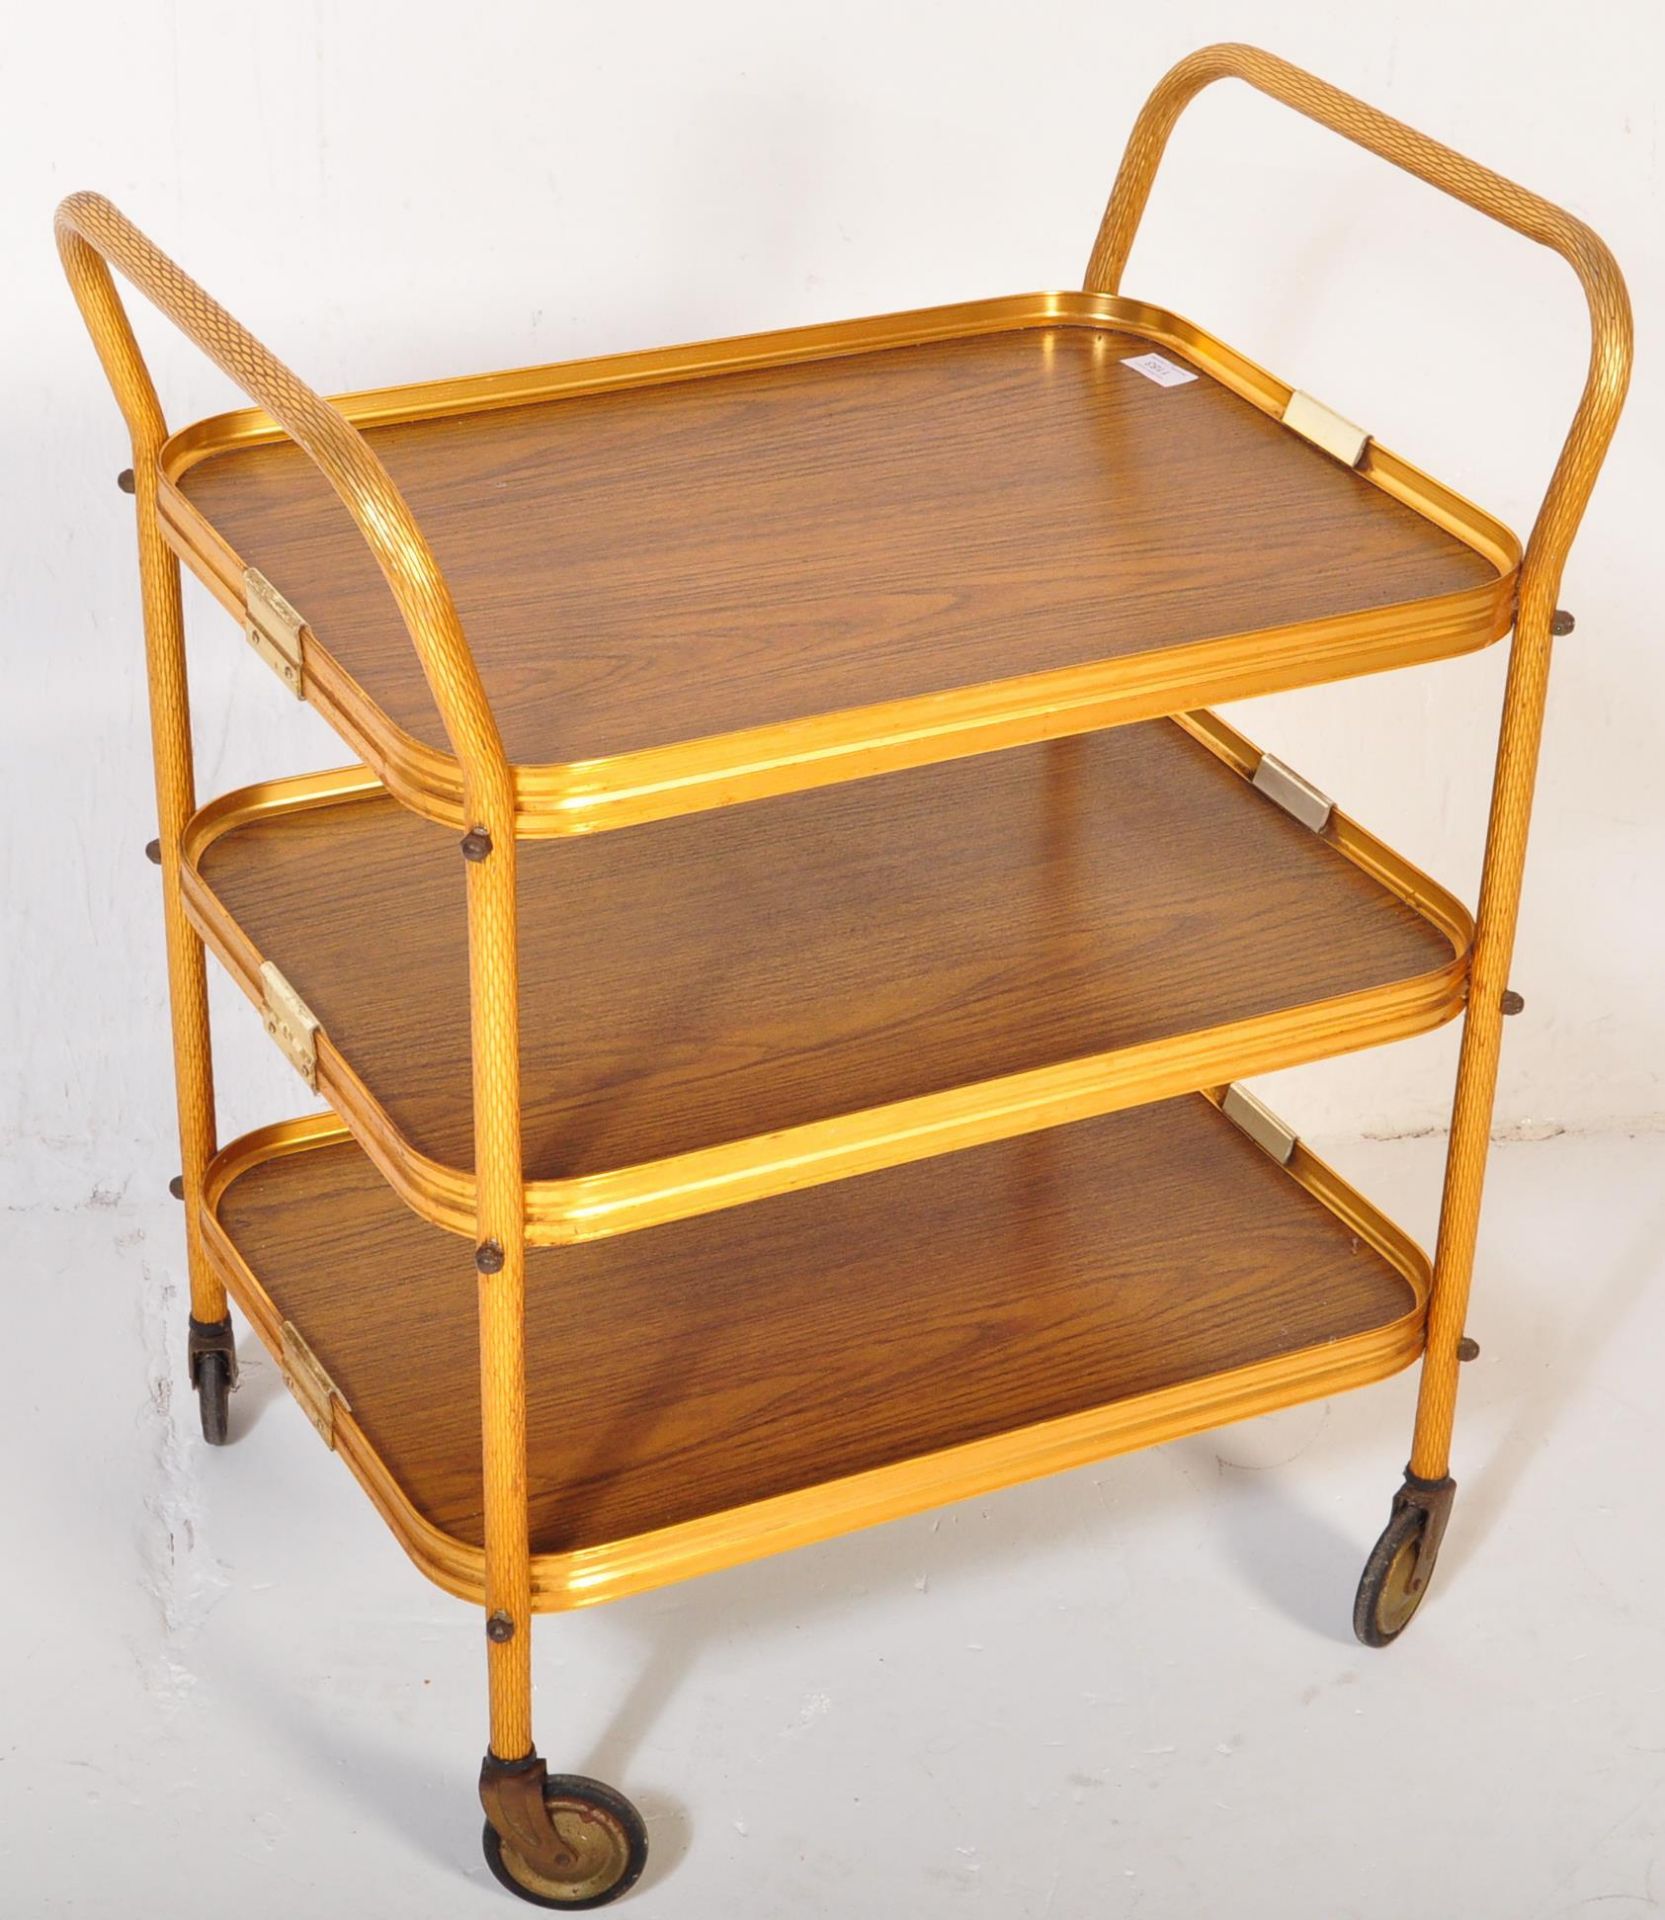 VINTAGE MID CENTURY FORMICA DRINKS SERVING HOSTESS TROLLEY - Image 2 of 5